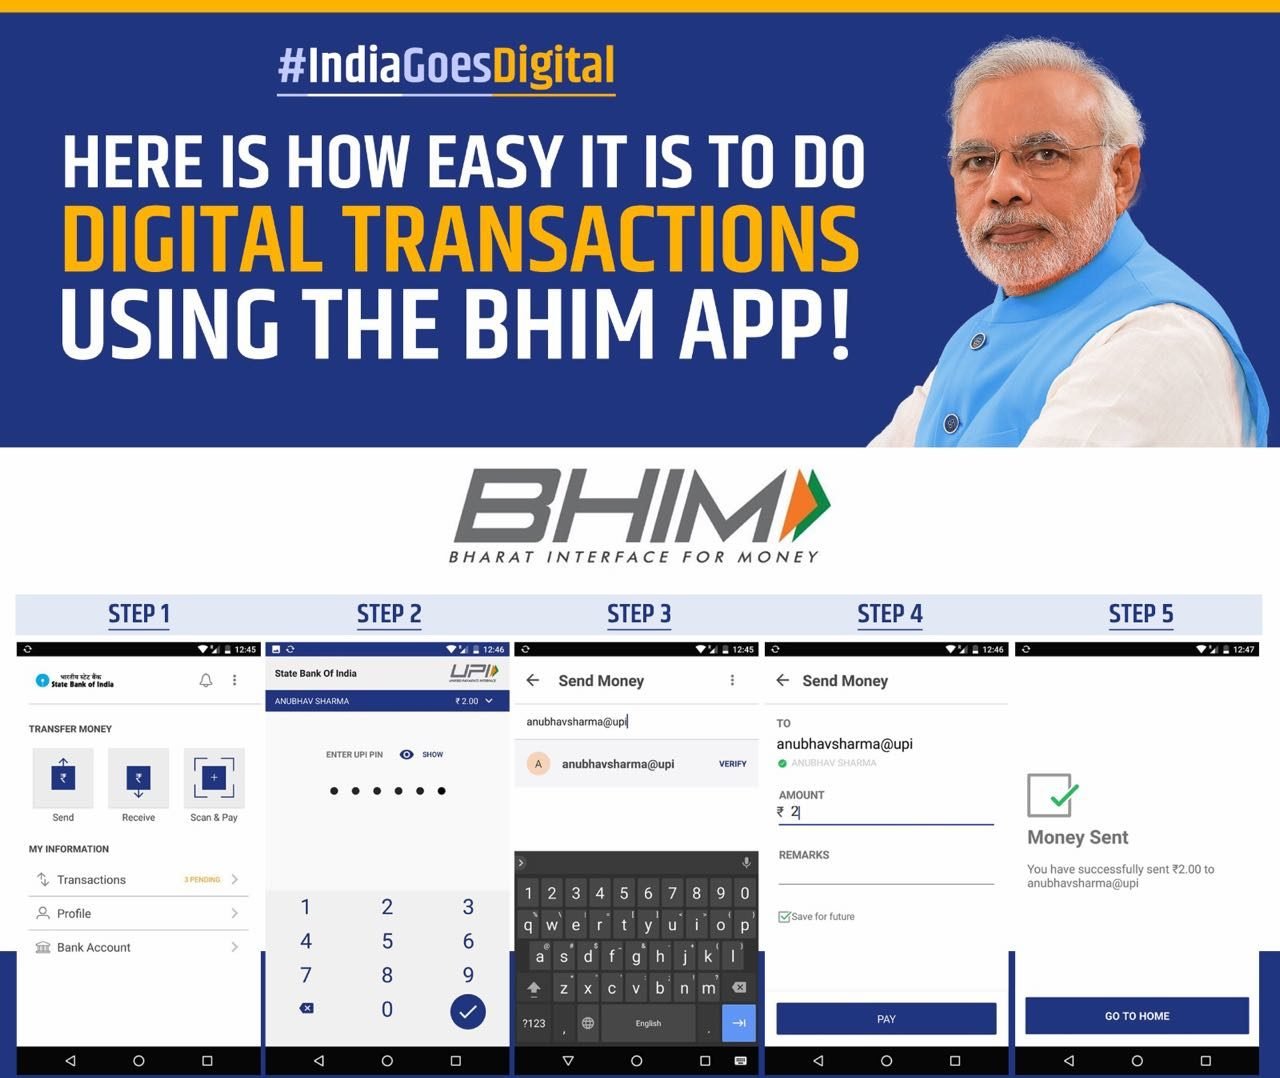 How to make and receive payments digitally using BHIM app